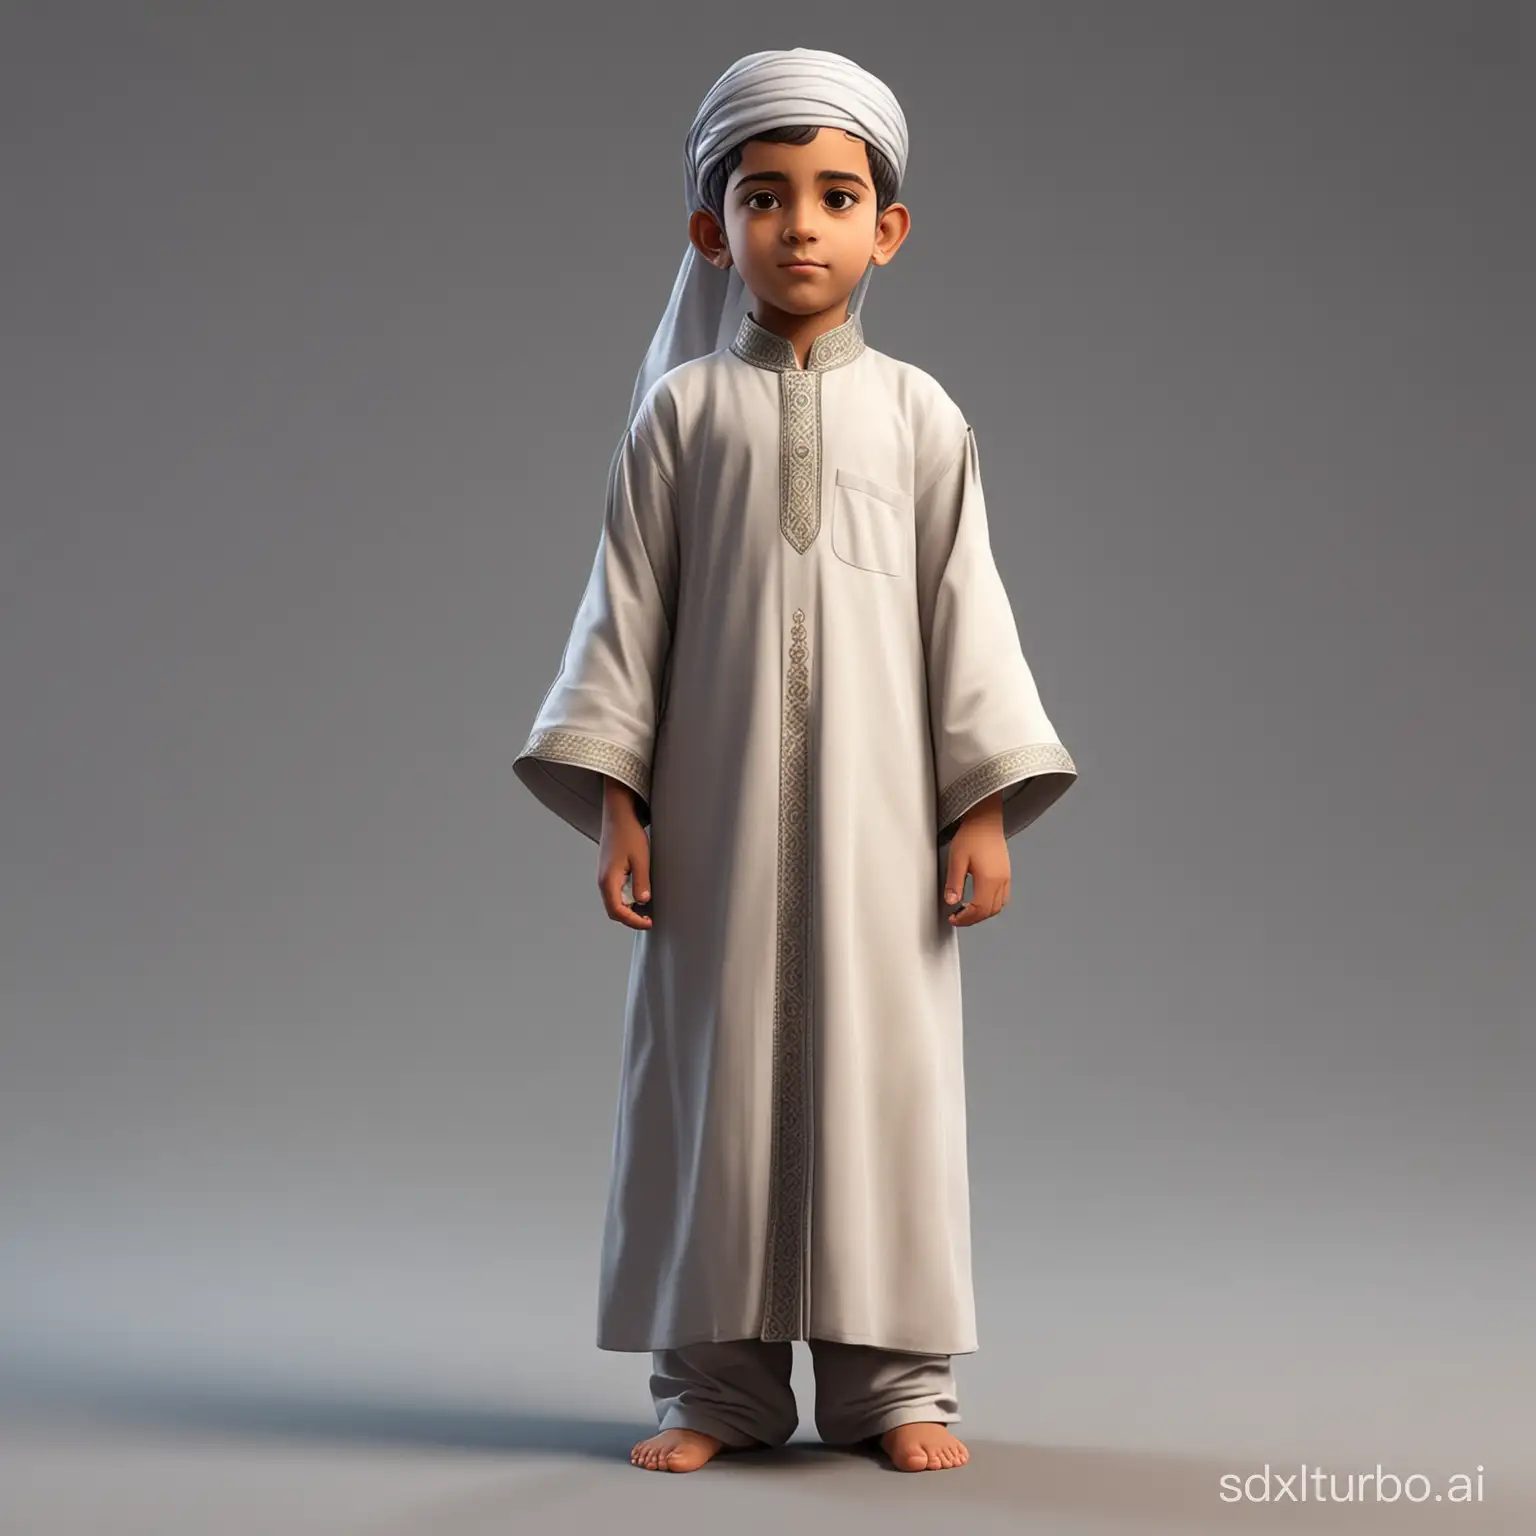 Boy-Muslim-Avatar-Wearing-Bisht-Stands-Tall-in-Virtual-Realm